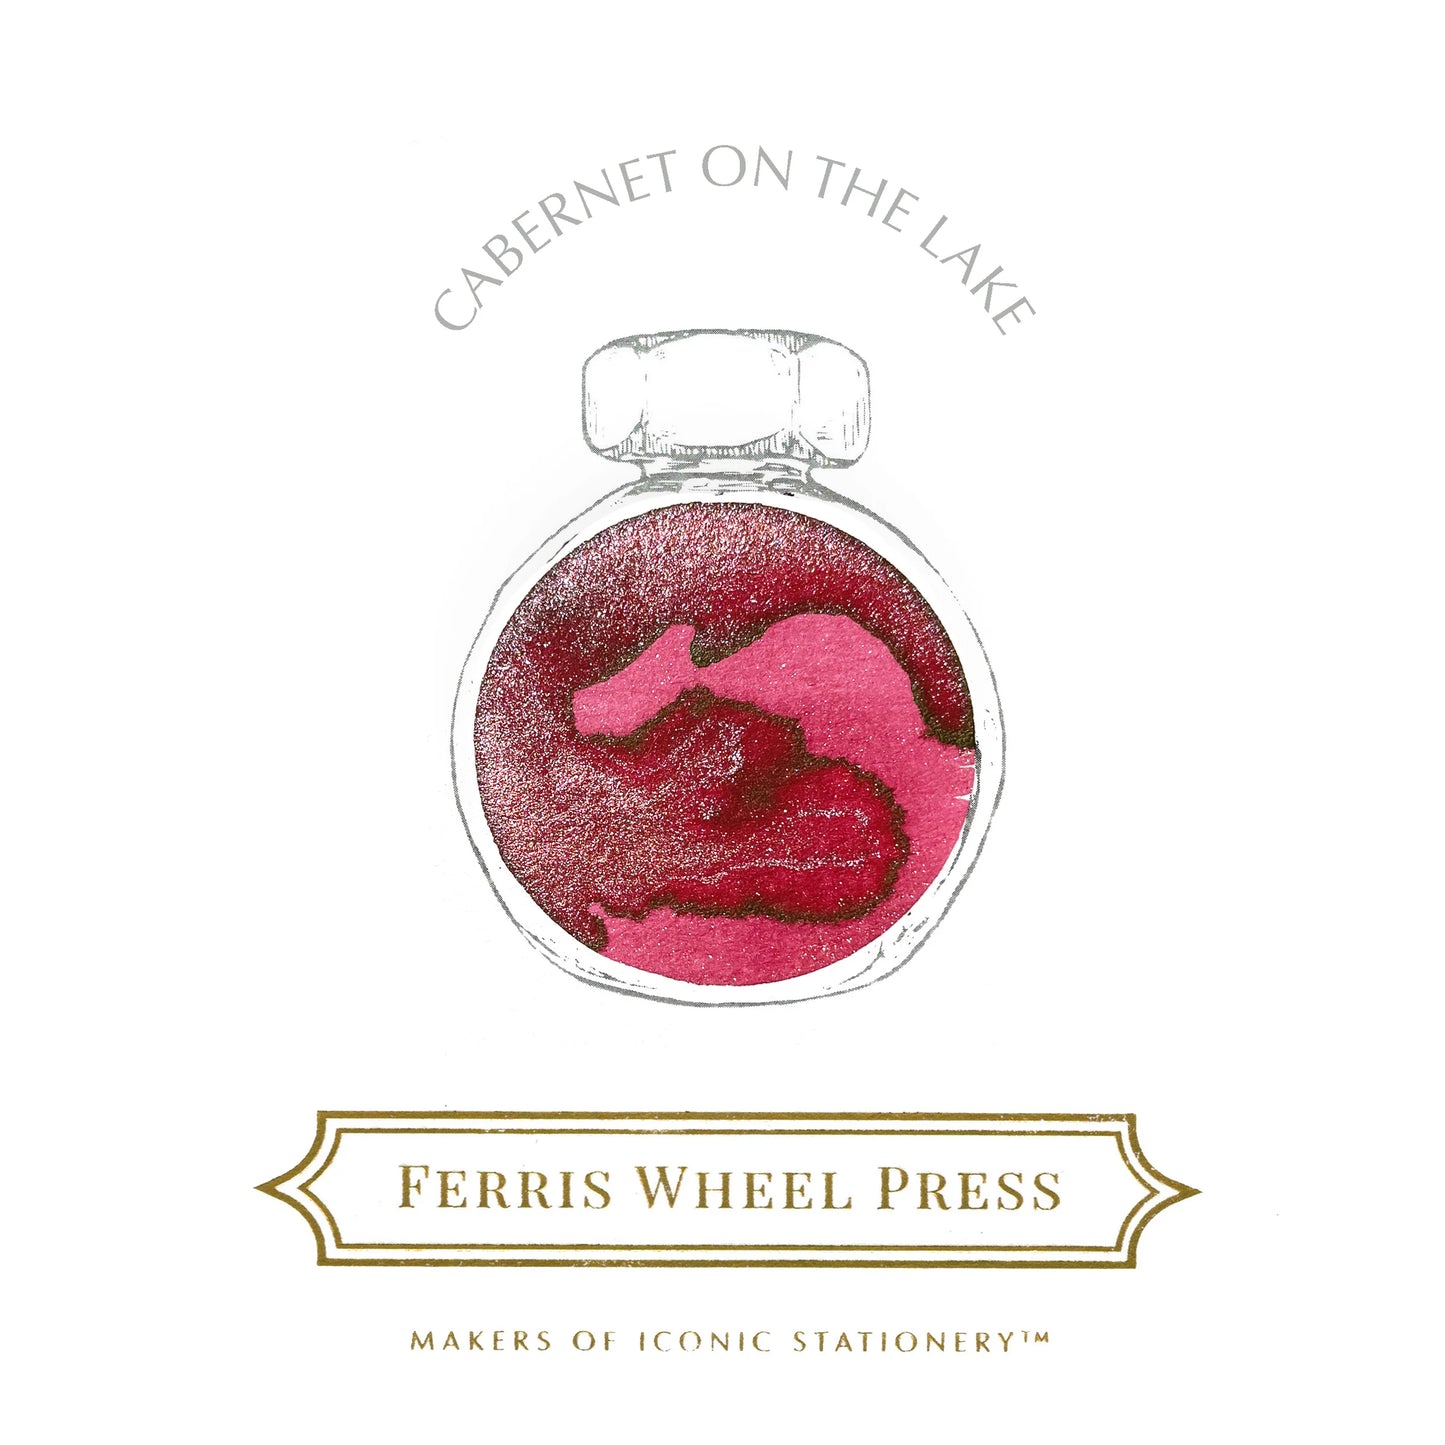 Ferris Wheel Press, Cabernet on the Lake Ink, Woven Warmth Collection, 38ml Ink